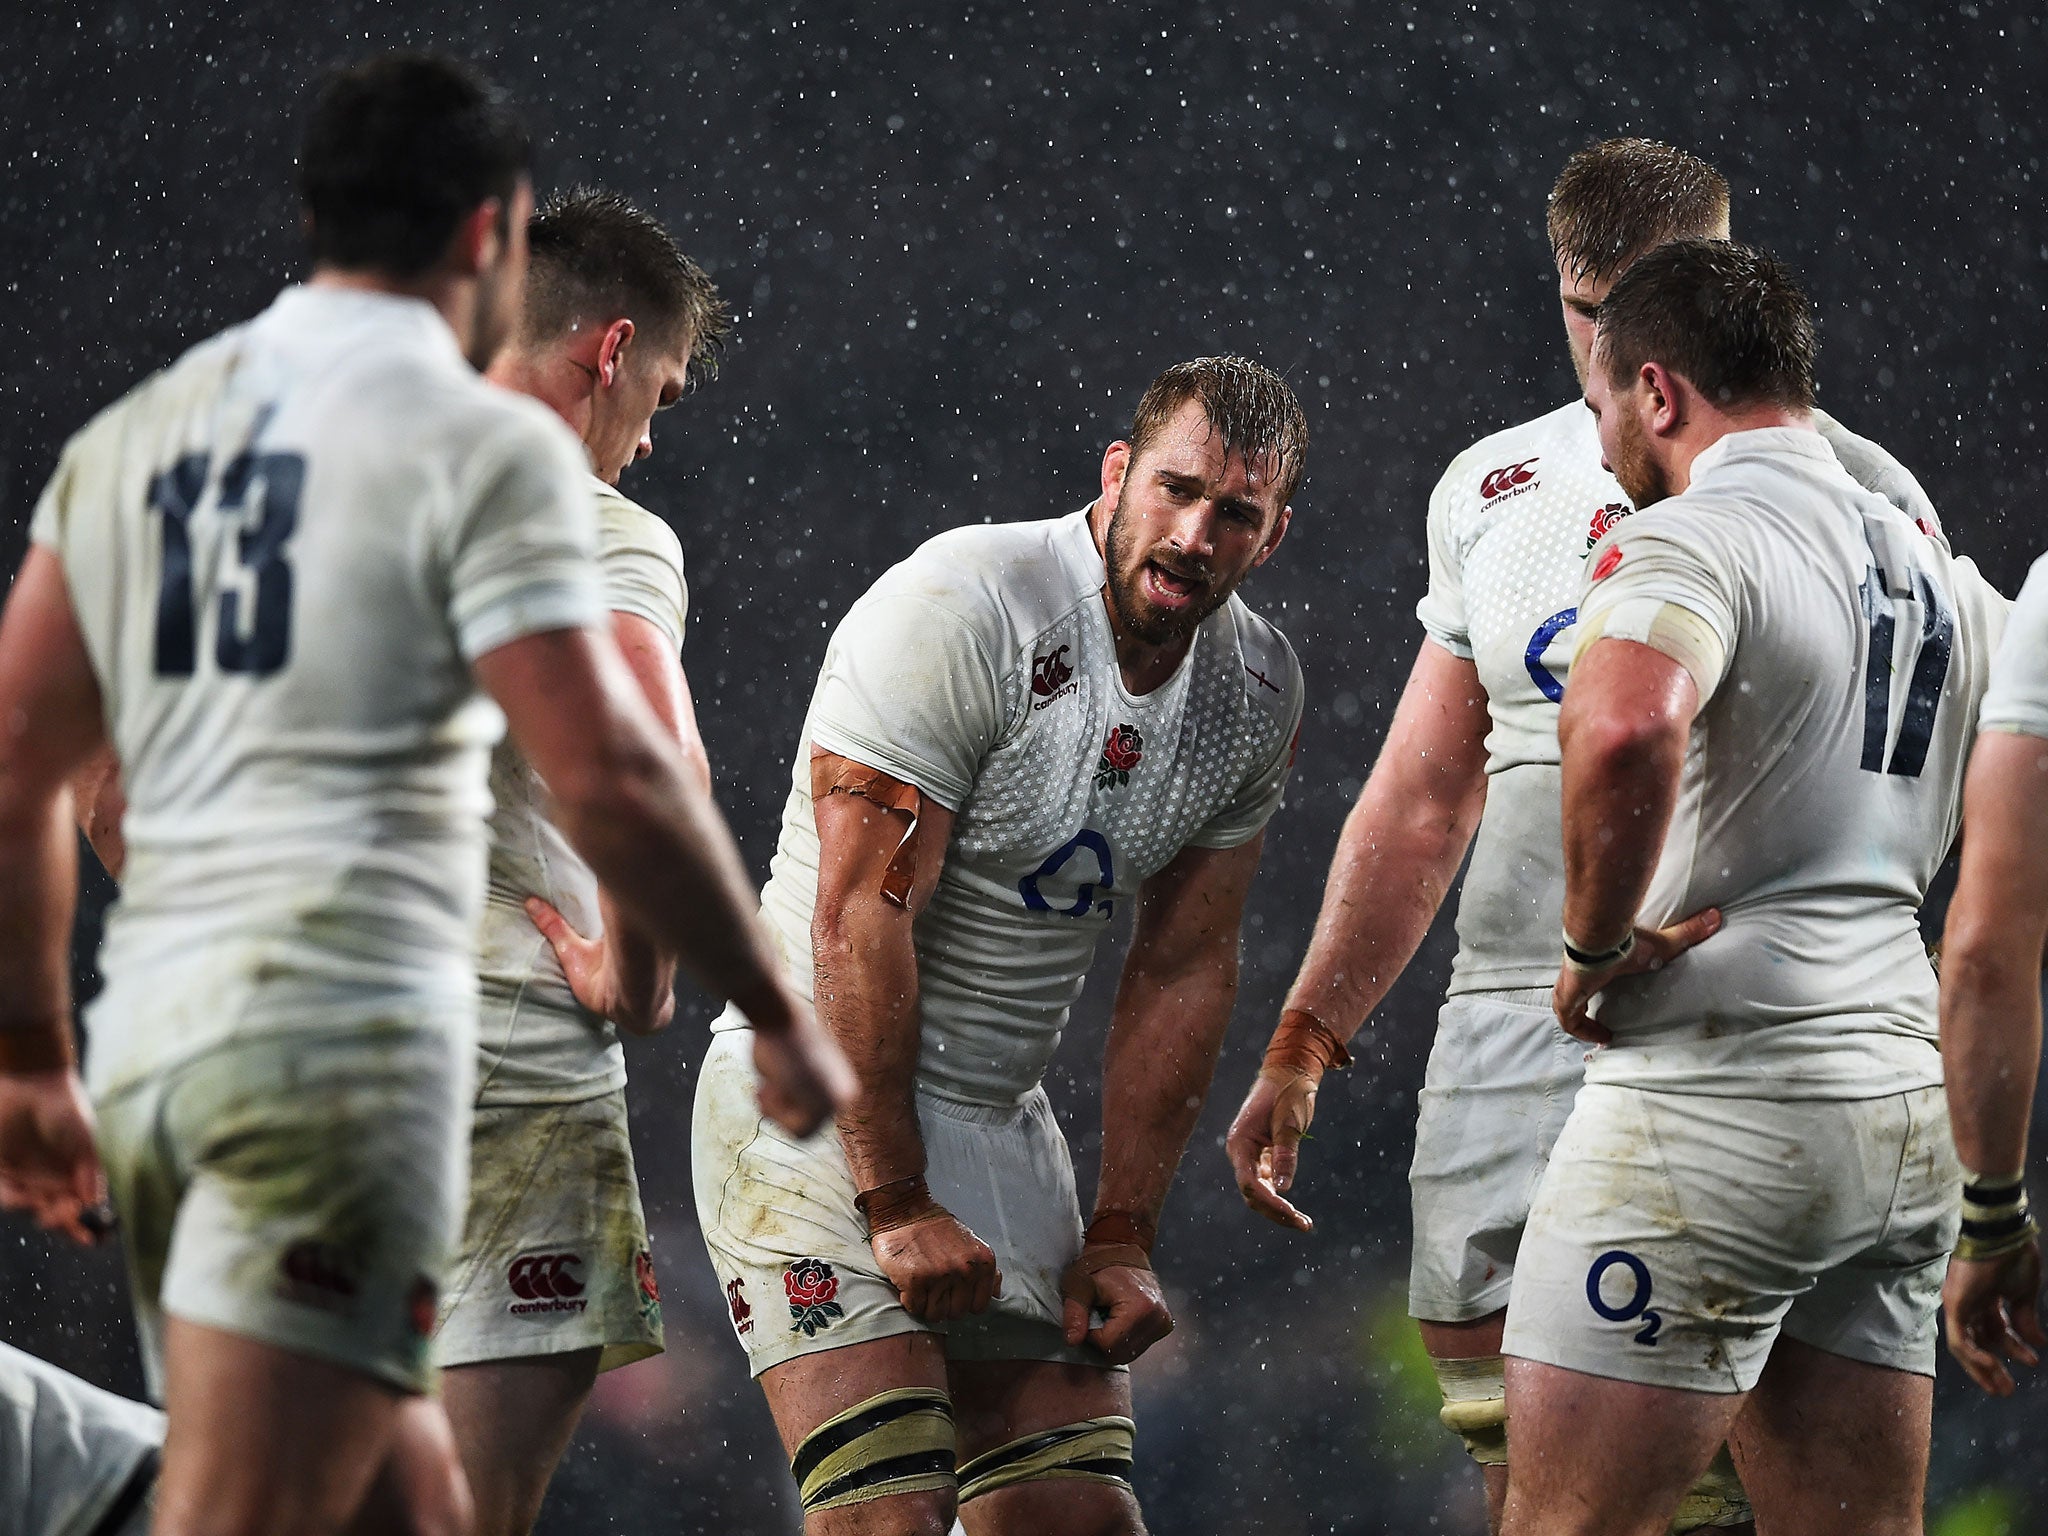 England captain Chris Robshaw stands with his team-mates in the rain at Twickenham after defeat to the All Blacks